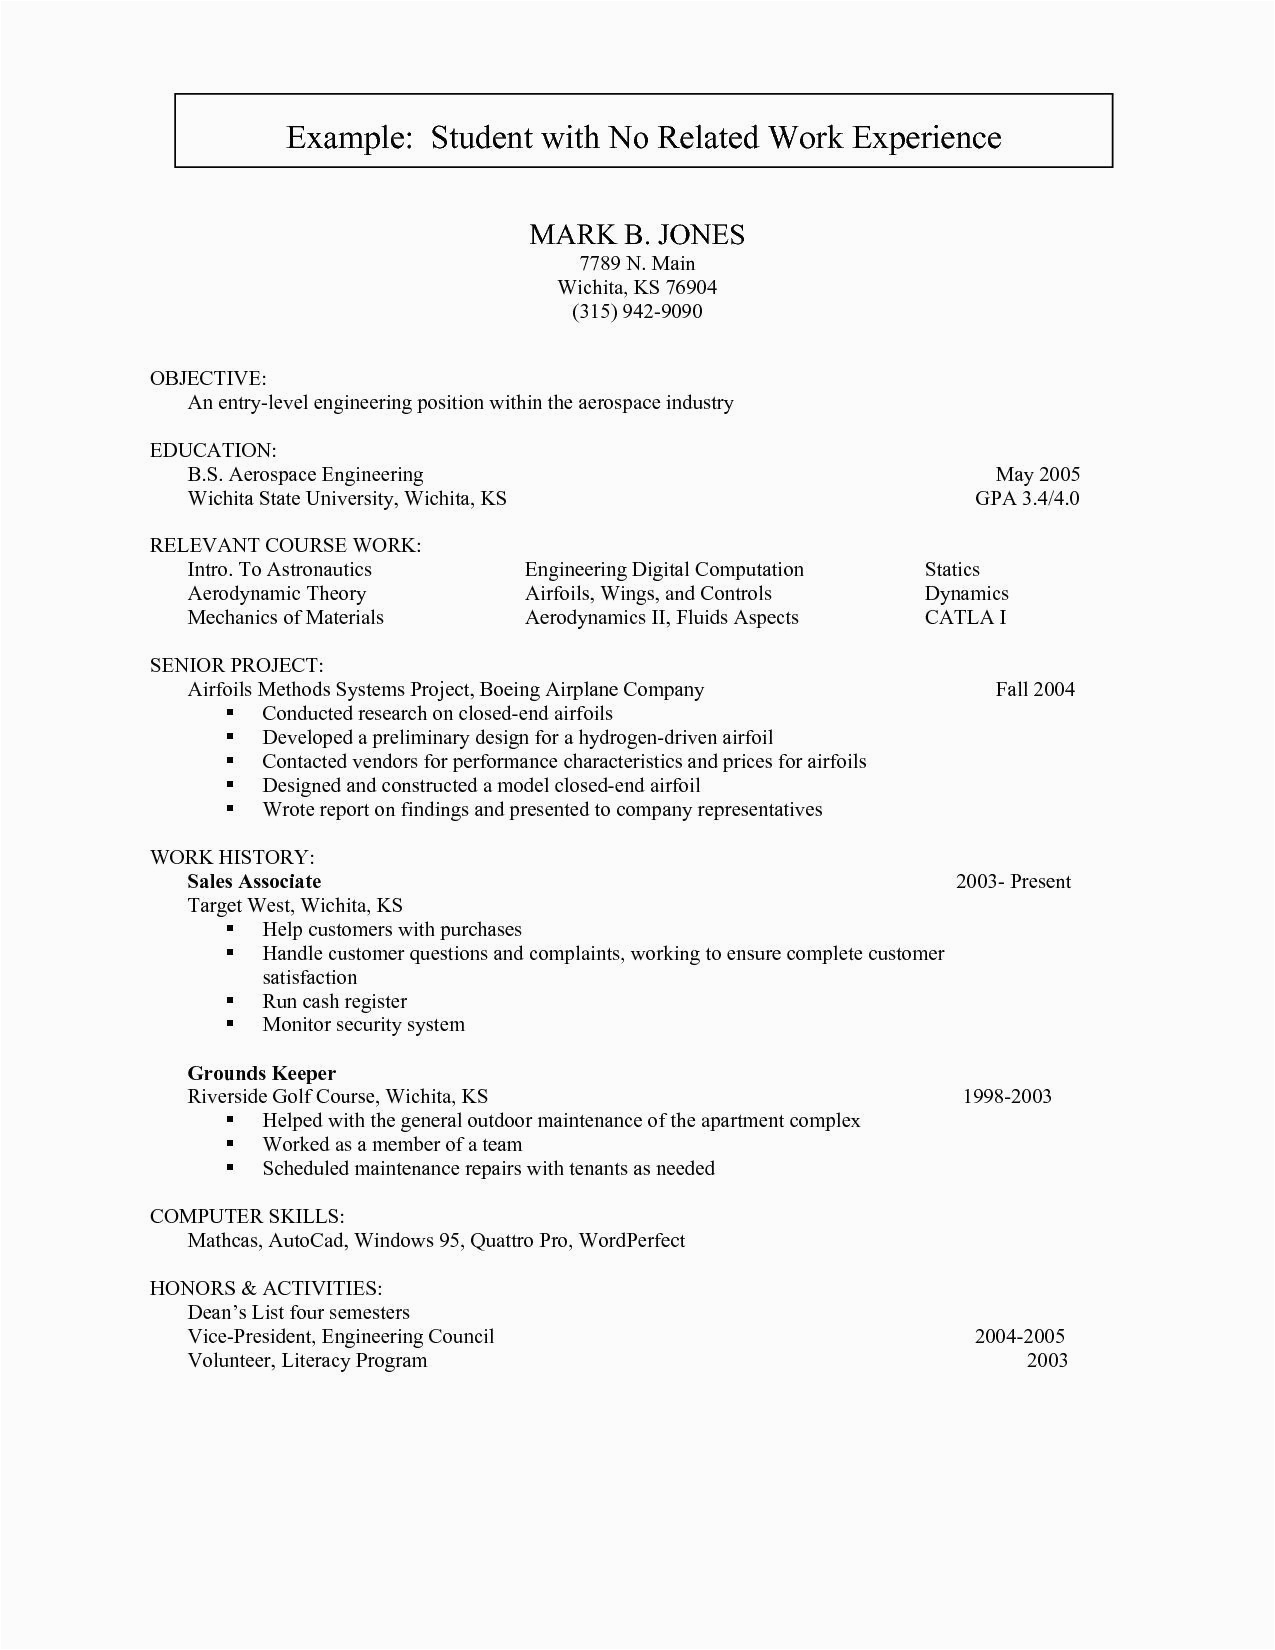 Sample Resume for someone with Little Job Experience Resume Examples by Industry and Job Title